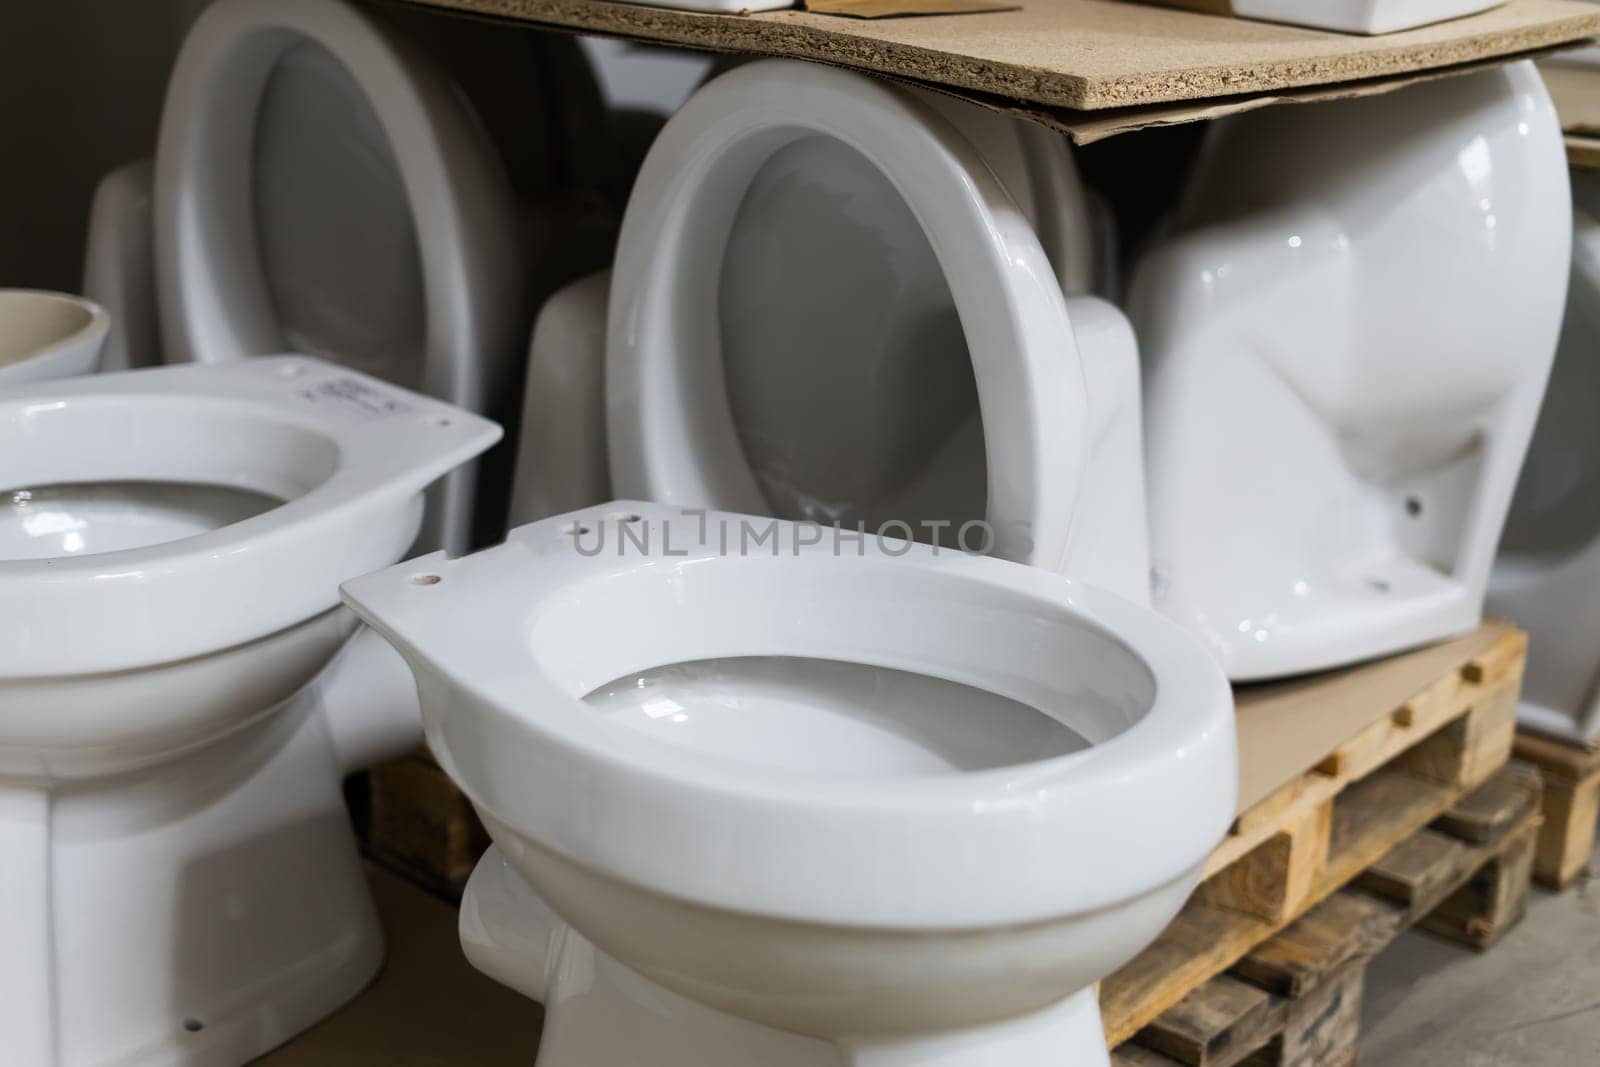 Showcase with toilets. Sale in the plumbing store of toilet bowls of different models. by Zelenin